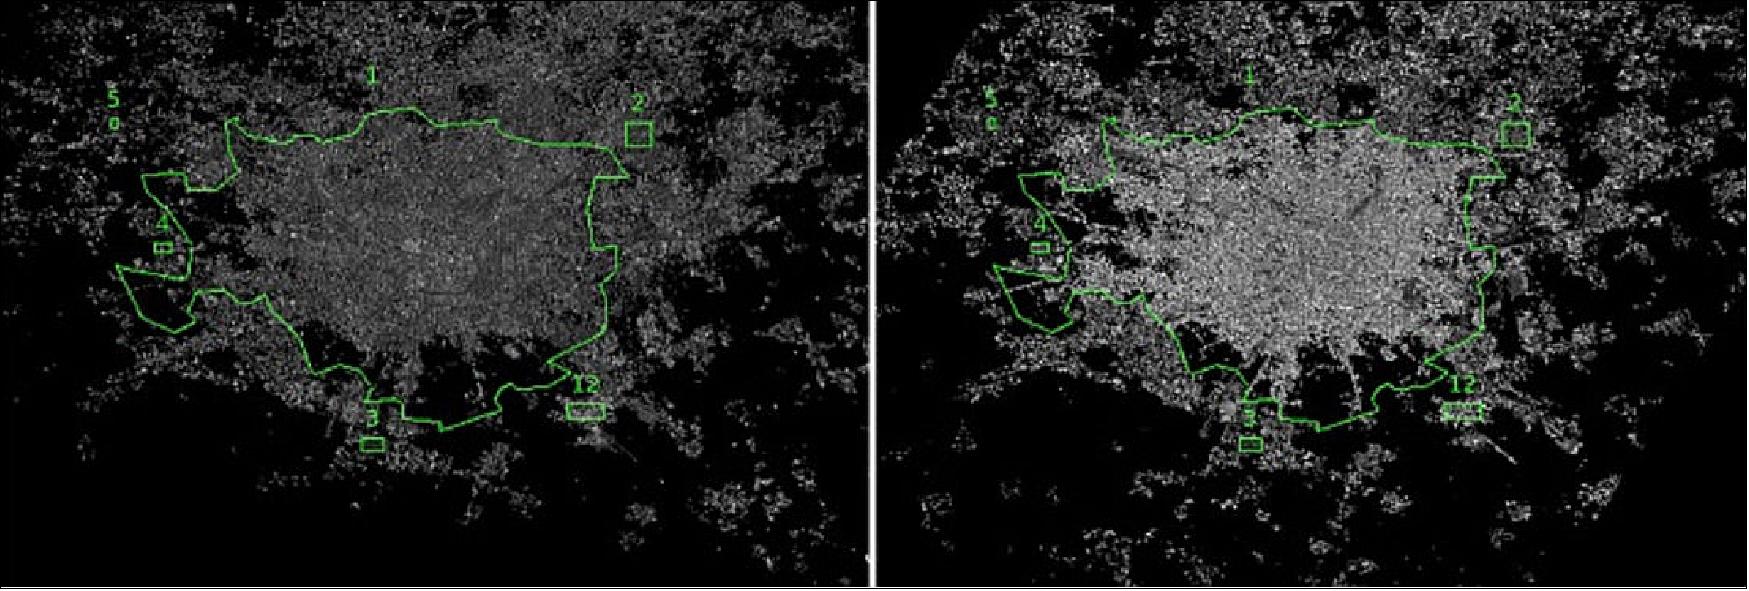 Figure 114: Milan, before and after: The Italian city of Milan replaced its orange sodium lamps with white led lamps in 2015. These nighttime images from the International Space Station show the city before and after the conversion (image credit: ESA/NASA/A. Sánchez de Miguel et al. 2019)